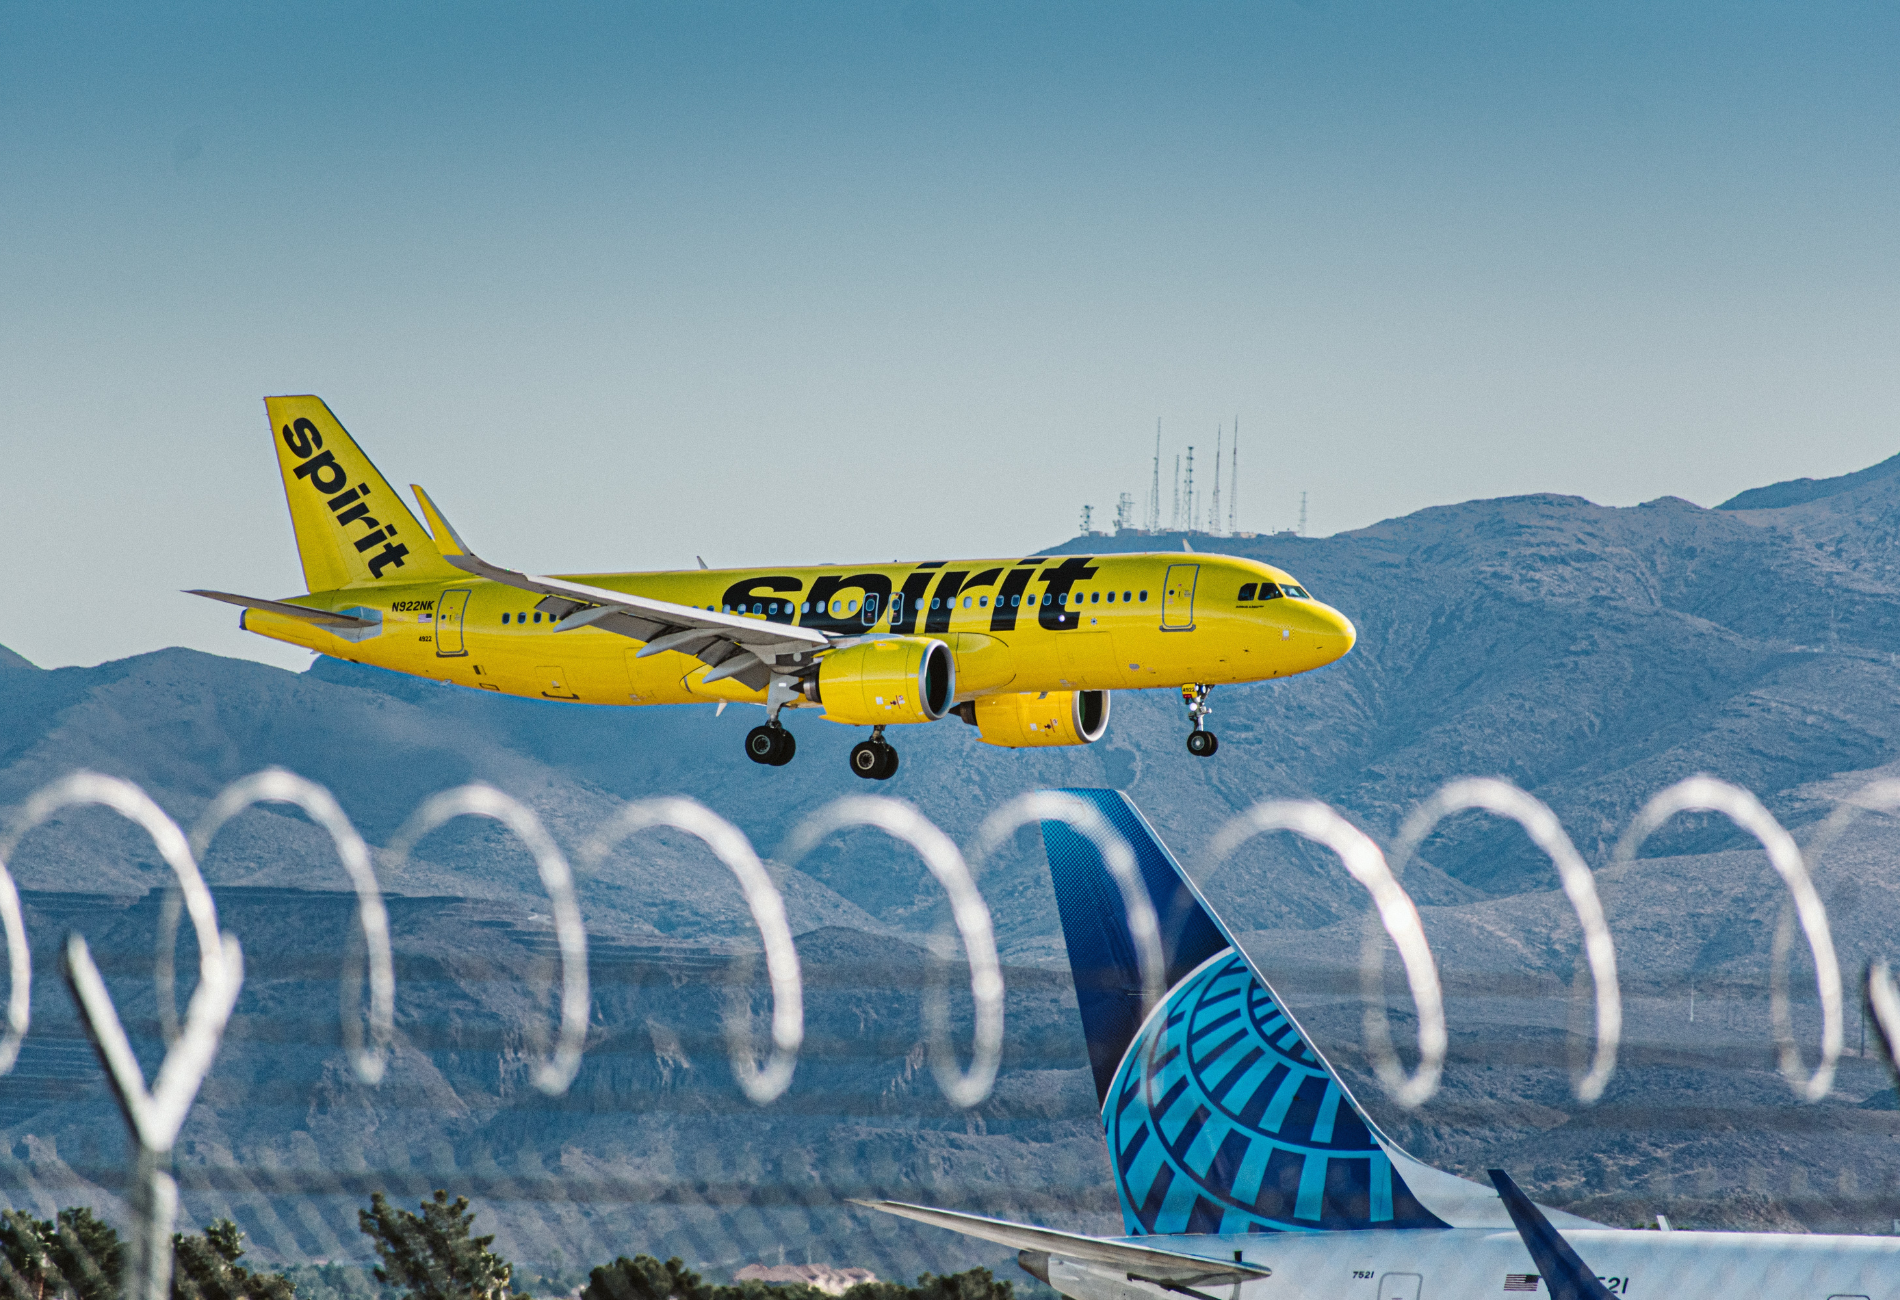 A yellow Spirit Airlines plane landing at an airport